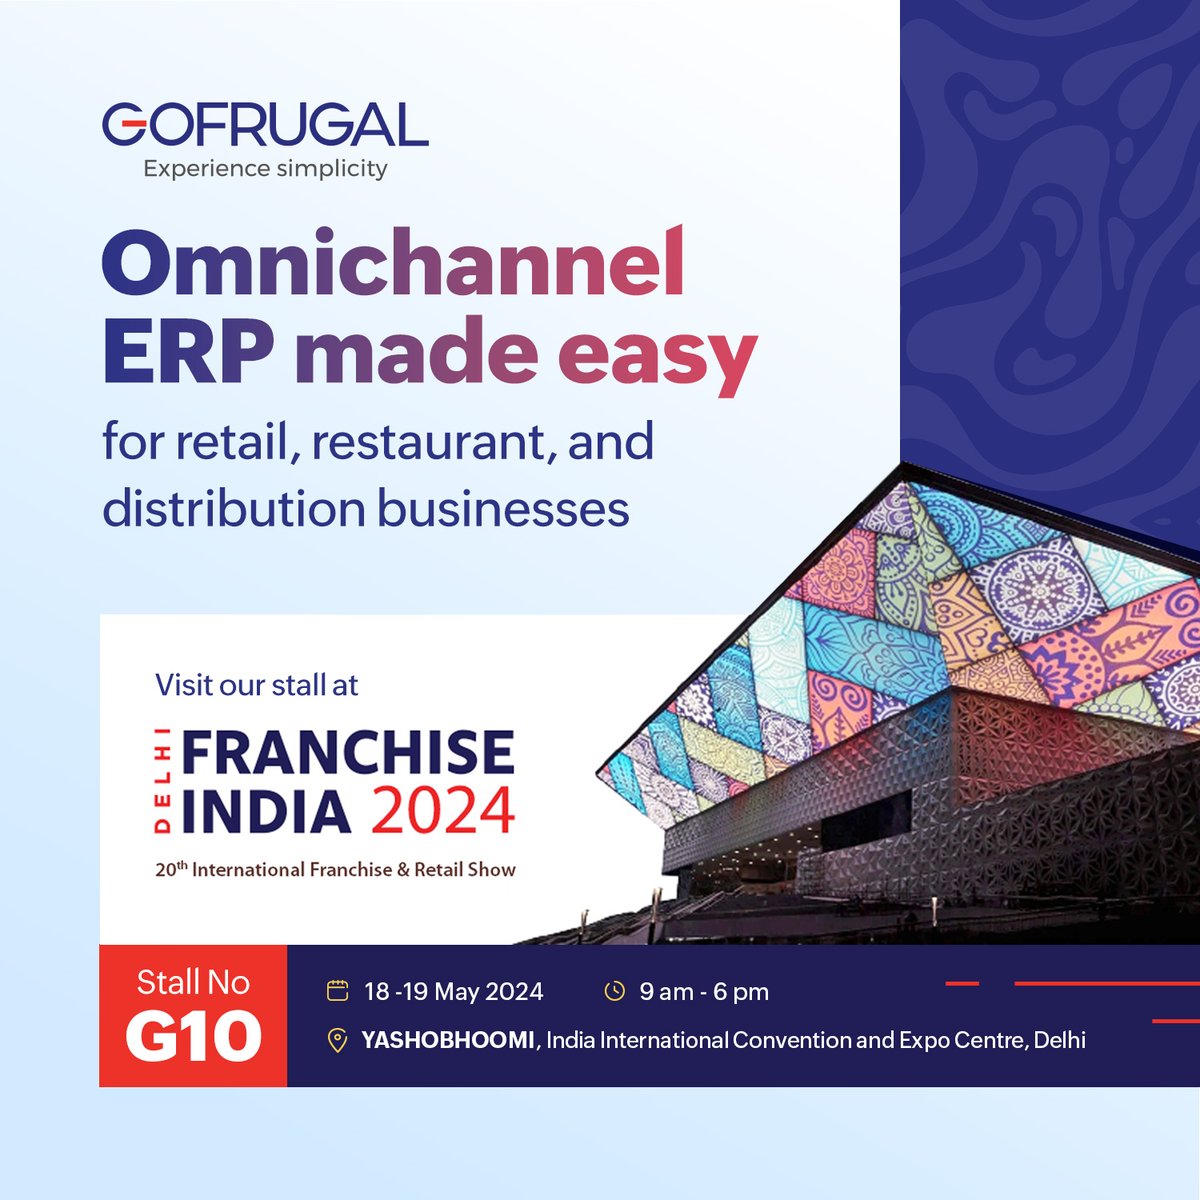 Namaskar,

We're delighted to be a part of Delhi Franchise India Expo 2024, happening at YASHOBHOOMI on 18 and 19 of May. Visit our stall G10, meet our team of experts, and transform your business with an omnichannel experience.

#FranchiseIndia #BusinessExpo #Gofrugal